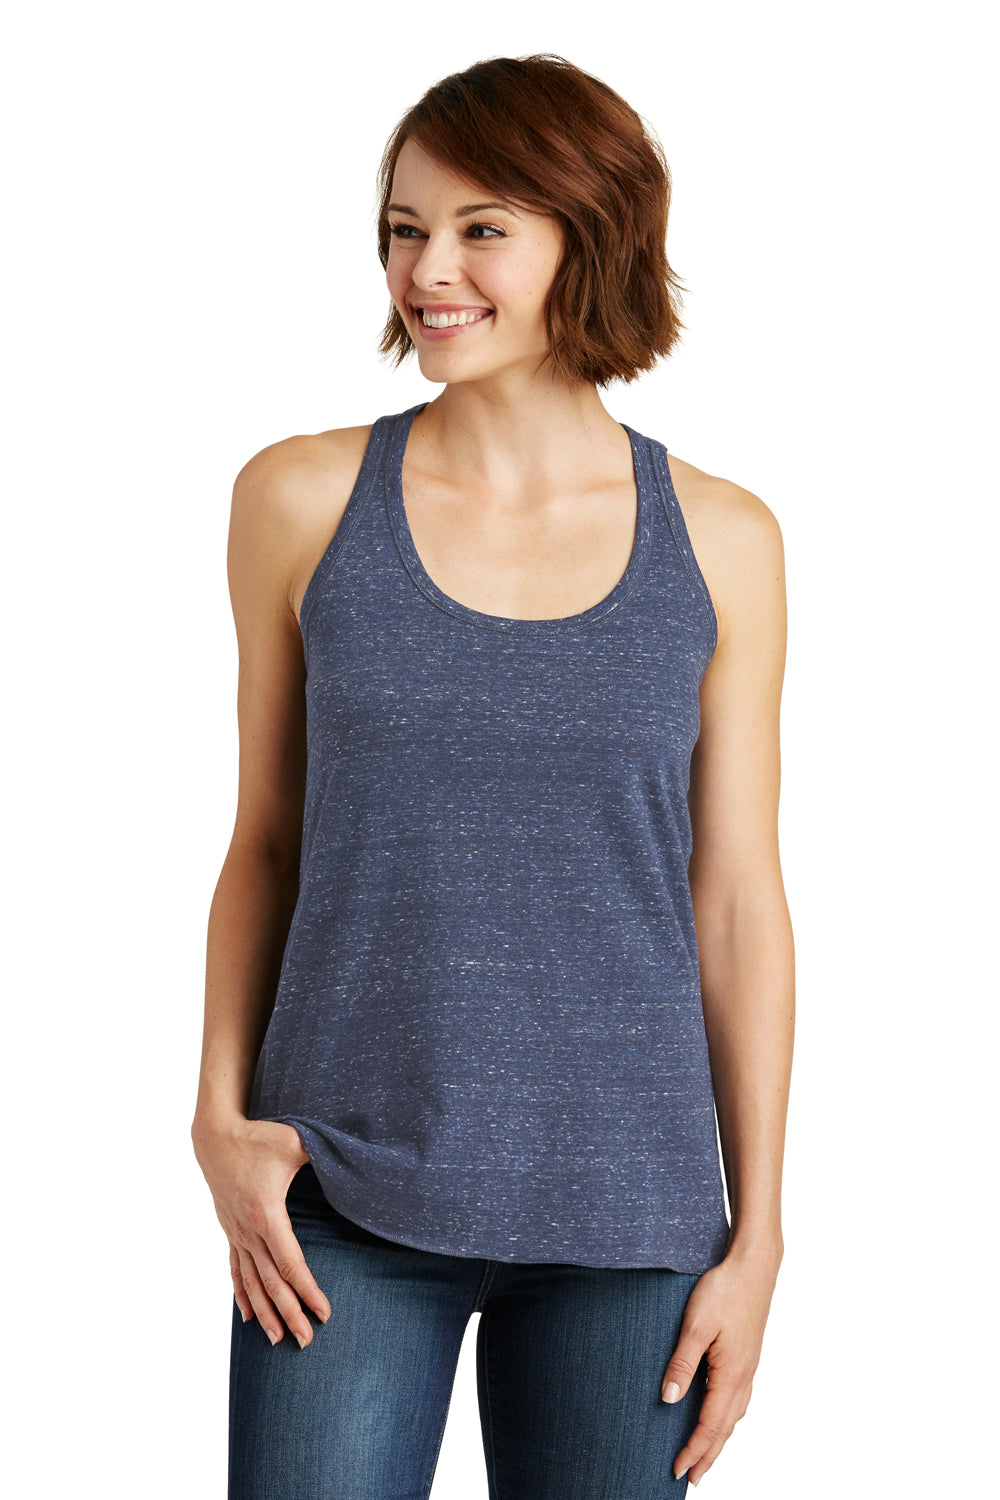 District DM466 Womens Cosmic Tank Top Navy Blue/Royal Blue Front